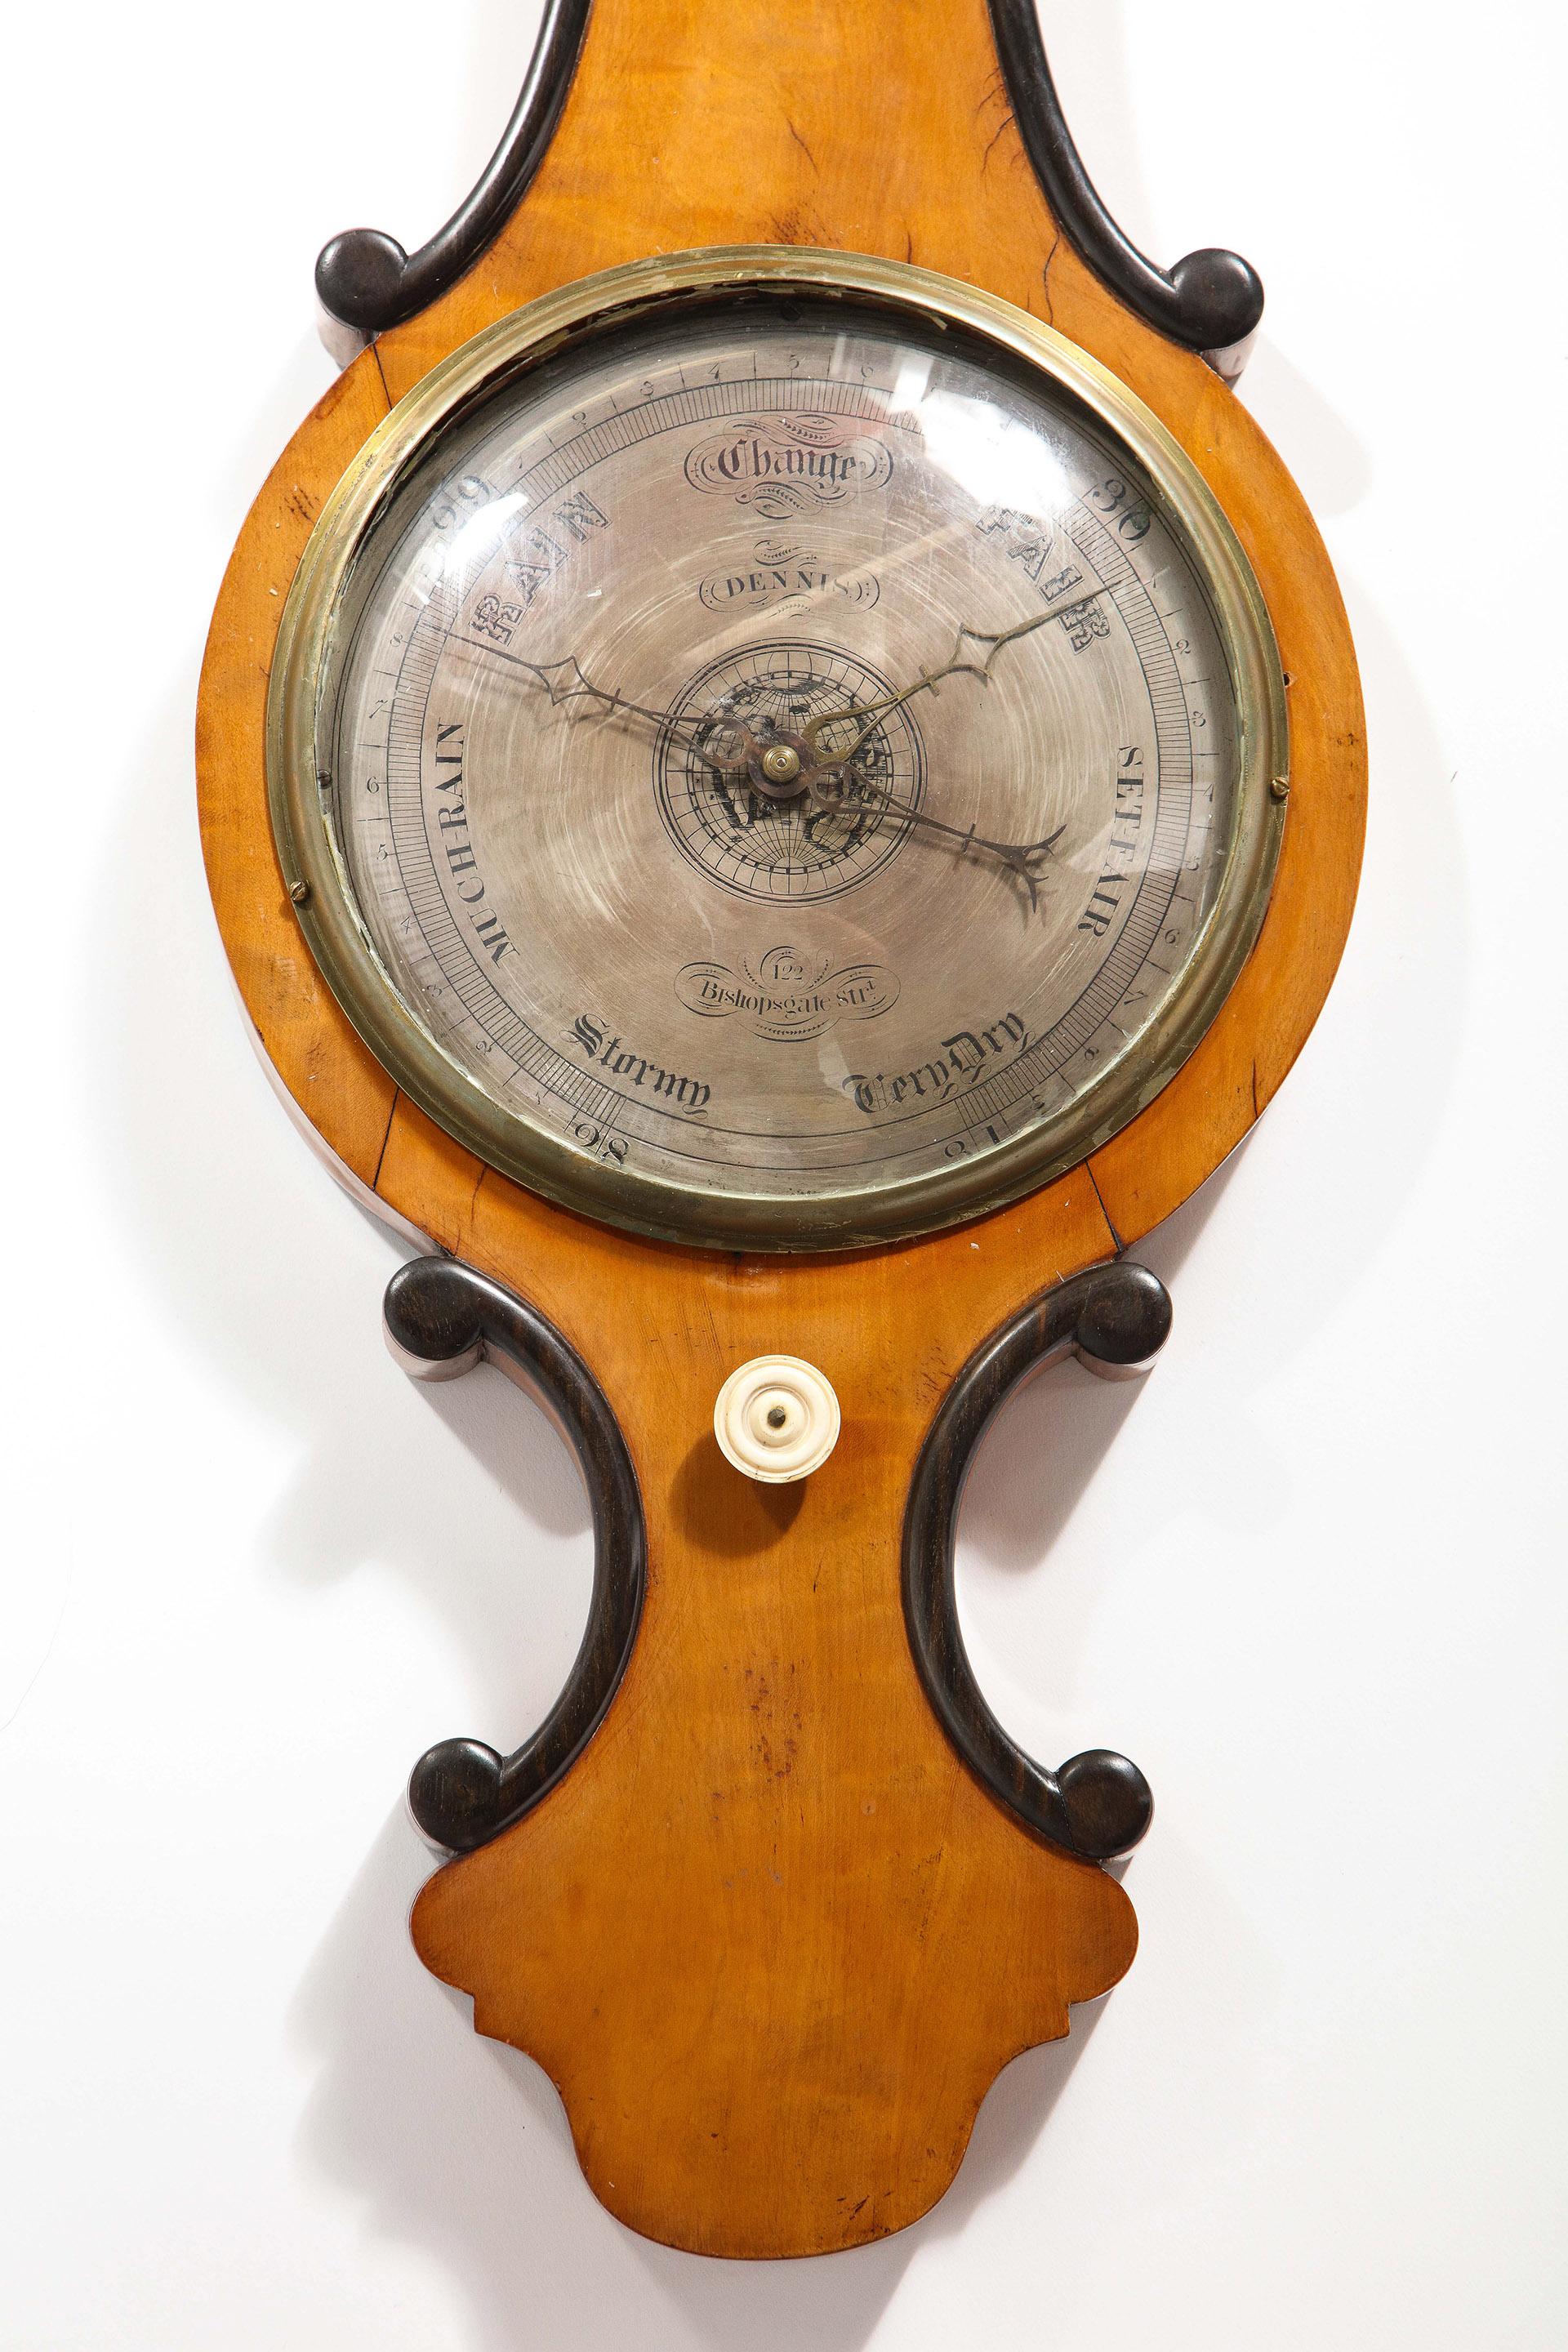 The banjo form barometer in satinwood with an ebony scroll outline, showing a brass-mounted thermometer over a similar style barometer. The back opening to reveal the original blown glass elements.